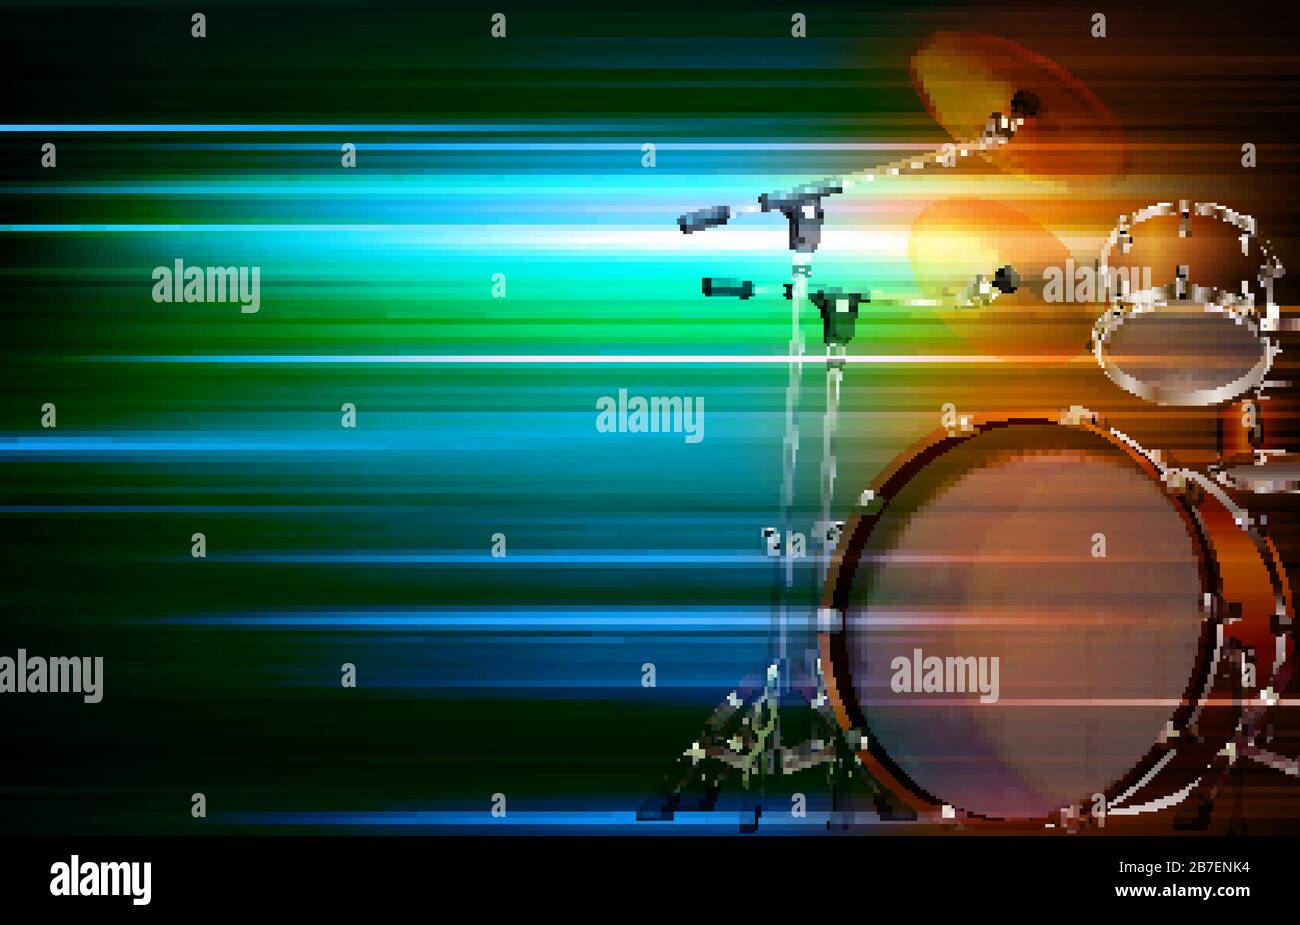 abstract green blur music background with drum kit Stock Vector